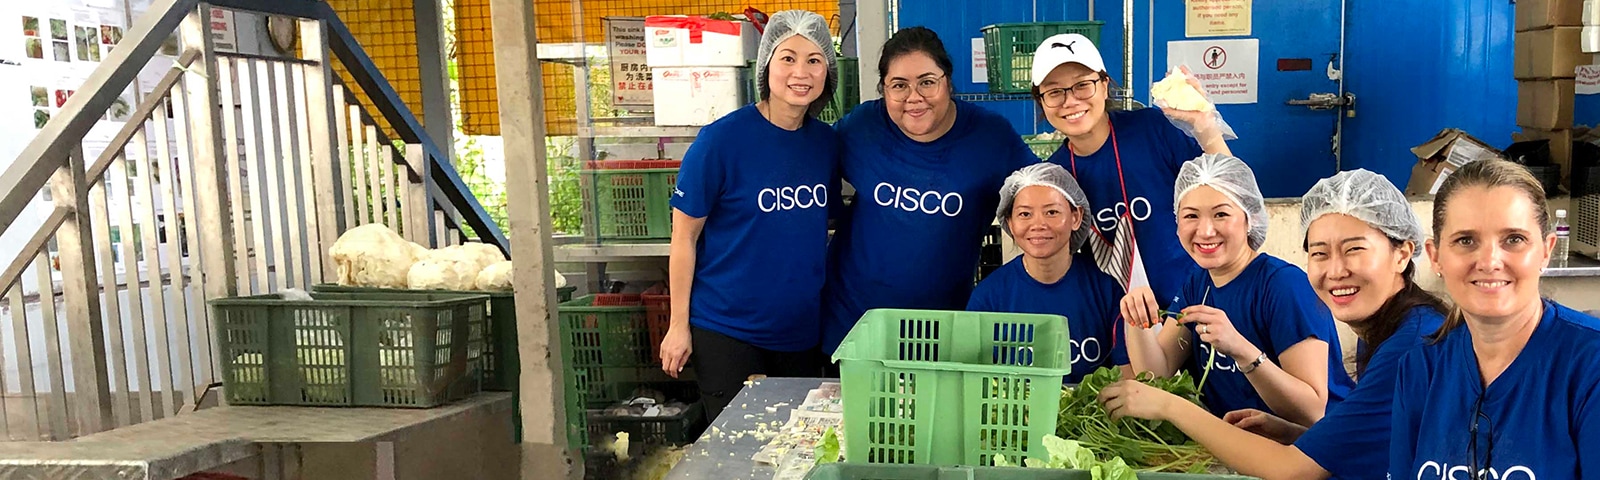 Seven women wearing the same blue Cisco shirt volunteering at a food bank while sorting lettuce